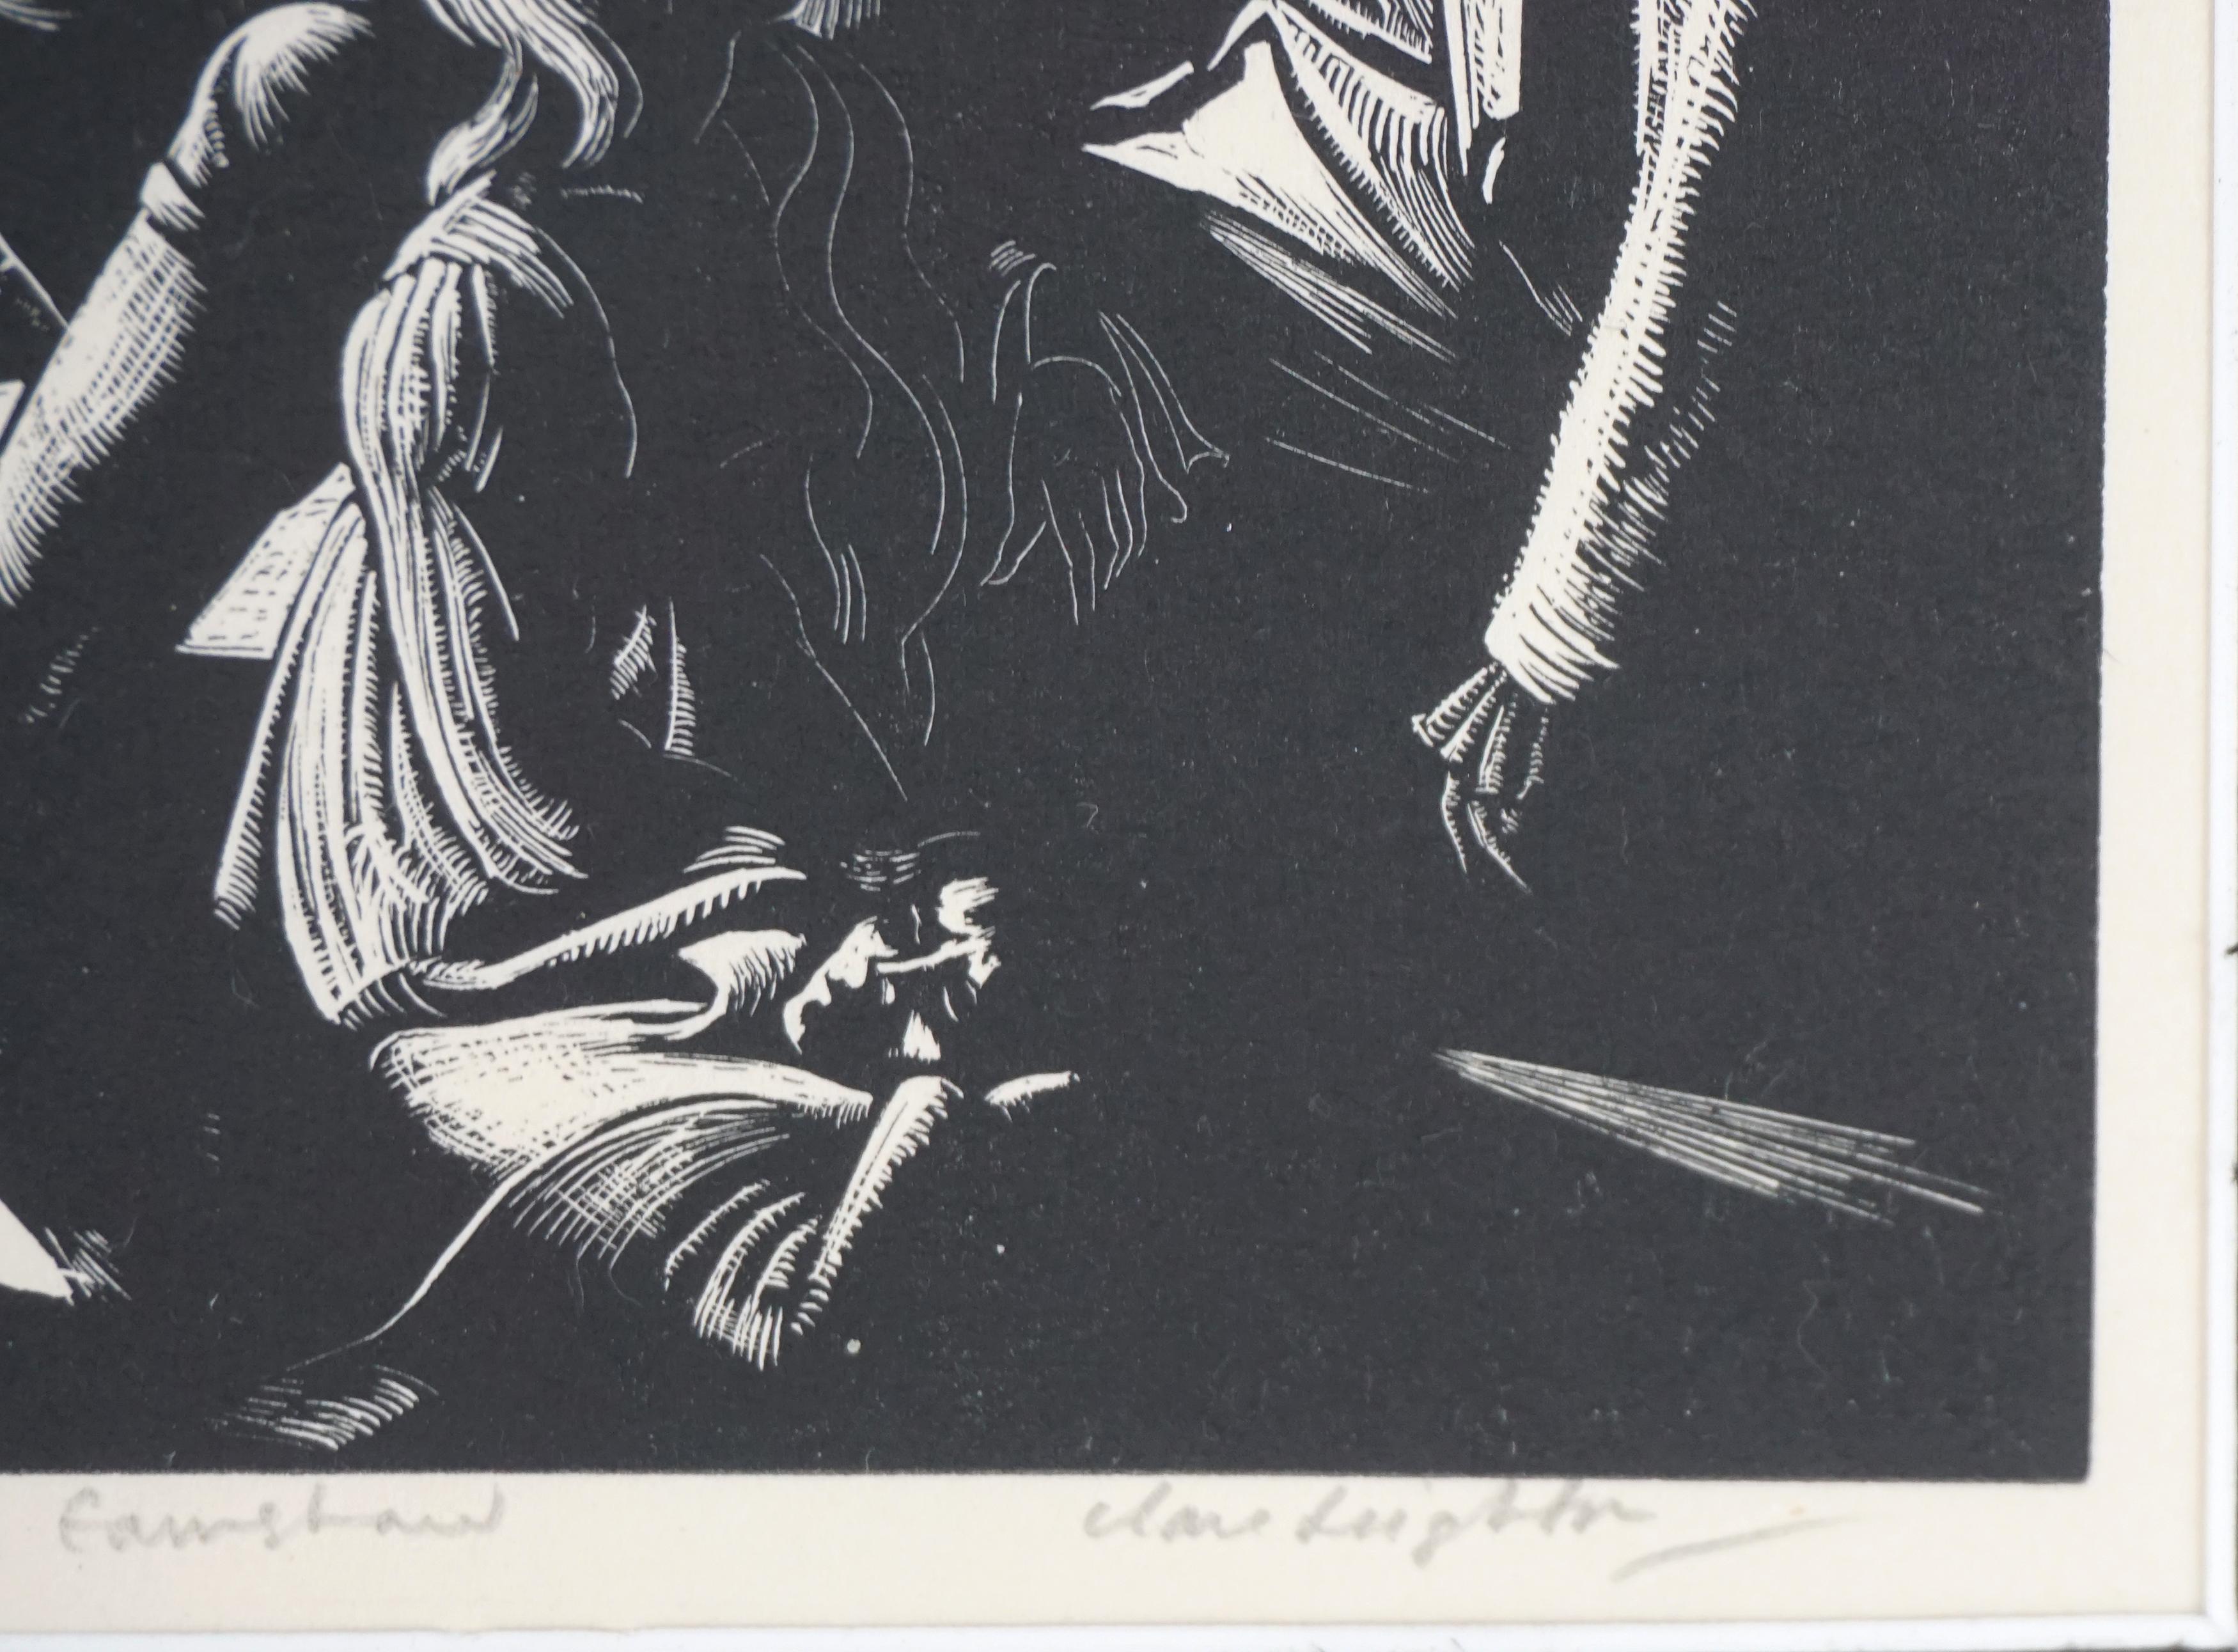 Early 20th Century Wuthering Heights Genre Woodcut -- Death of Earnshaw #28/30 - Other Art Style Print by Clare Leighton